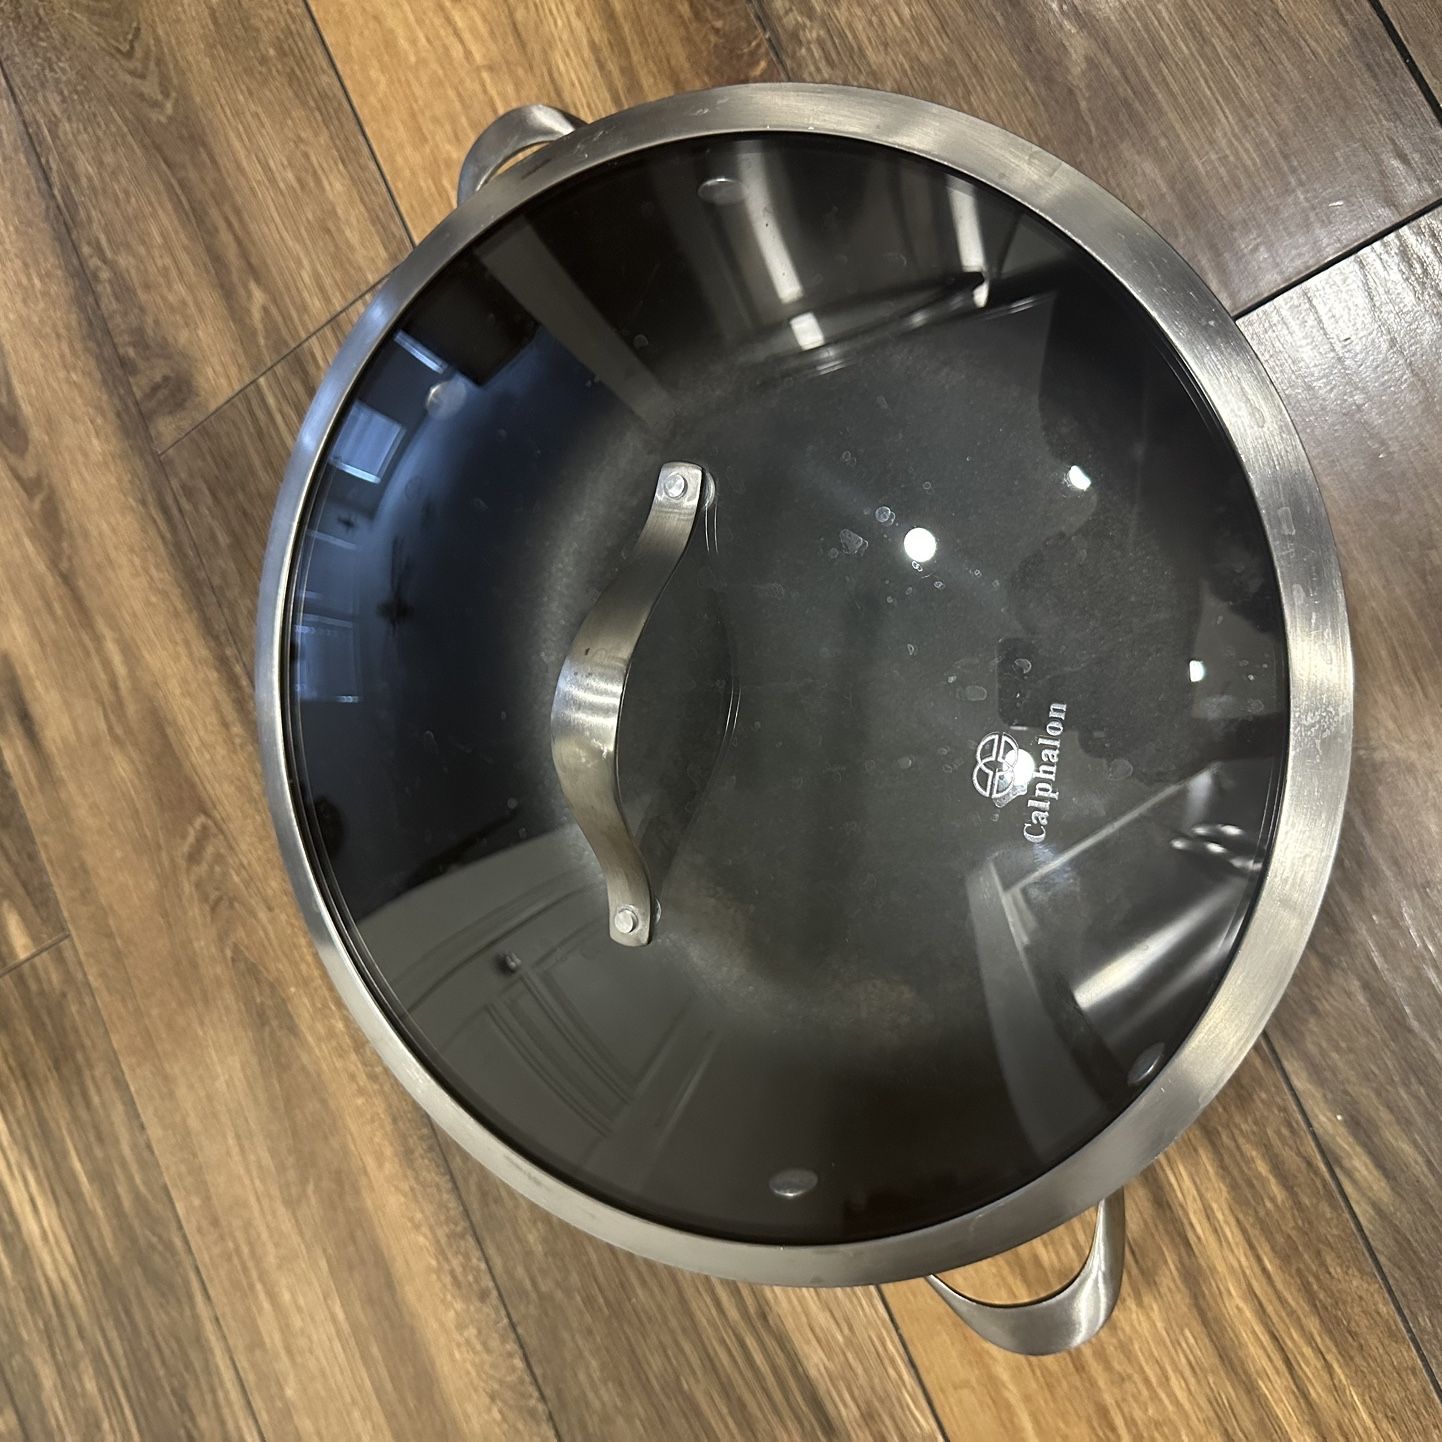 Calphalon contemporary 12 inch wok for Sale in Philadelphia, PA - OfferUp